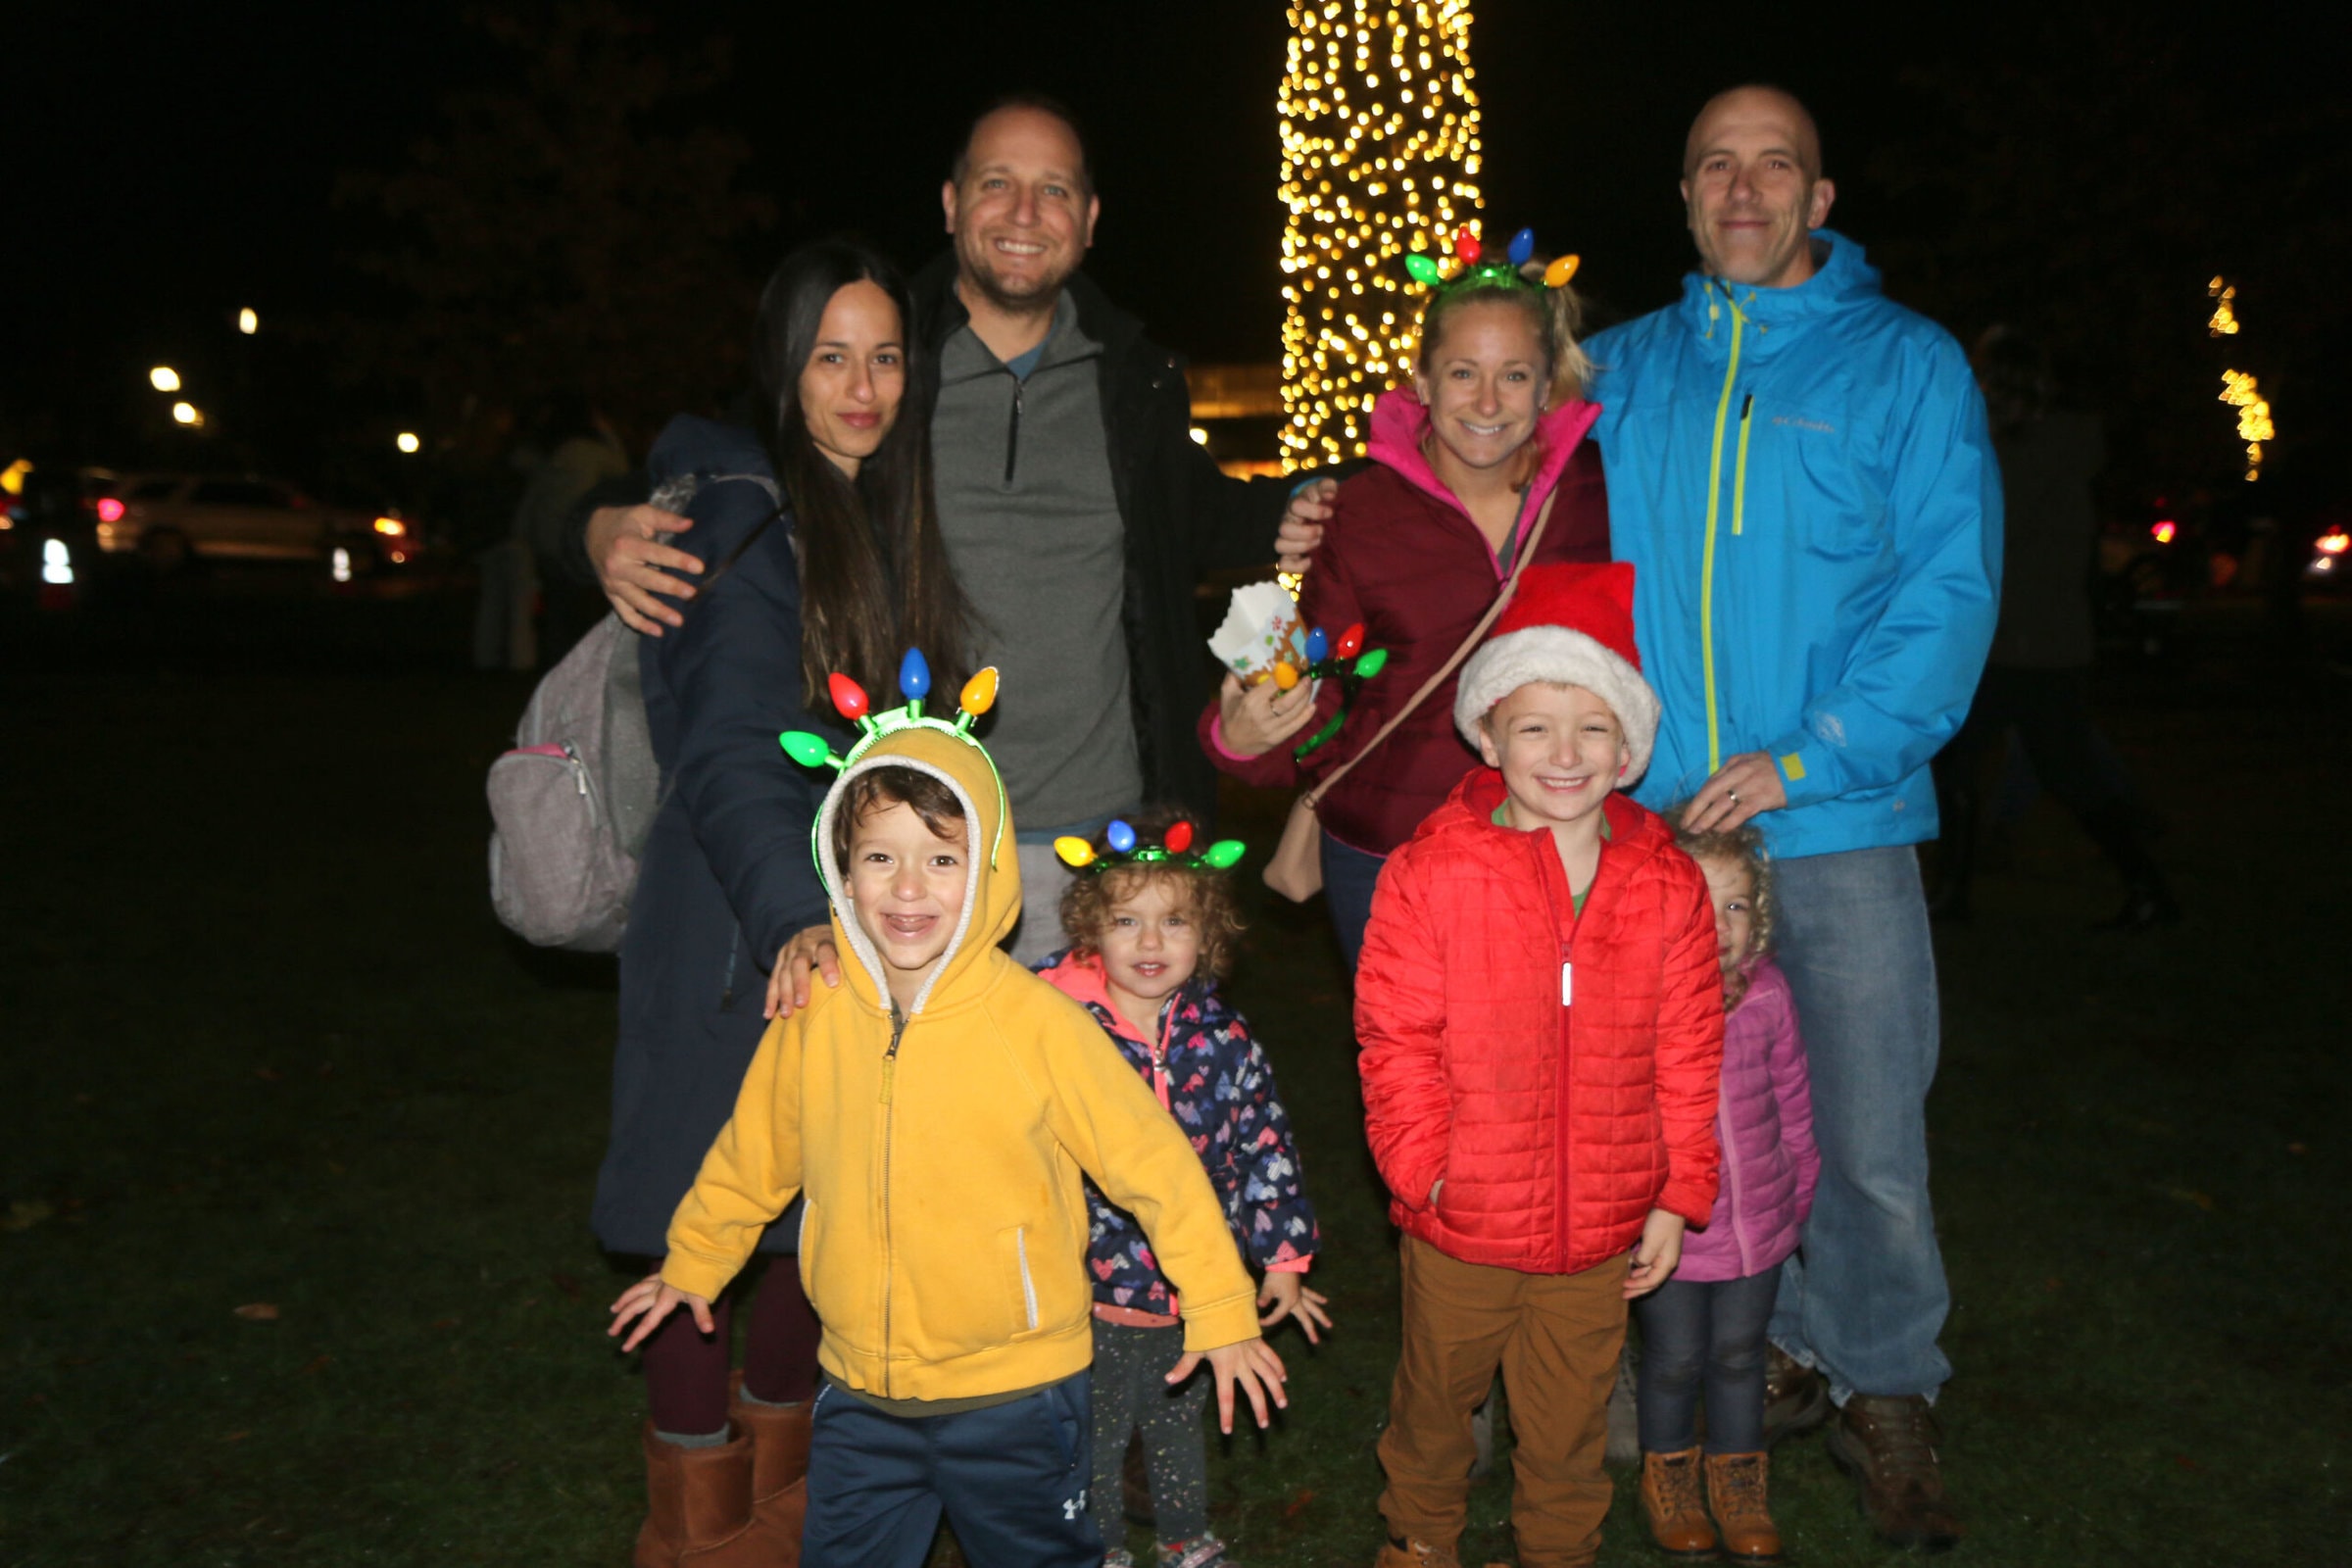 Shrewsbury ‘lights up the Common’ for the holidays